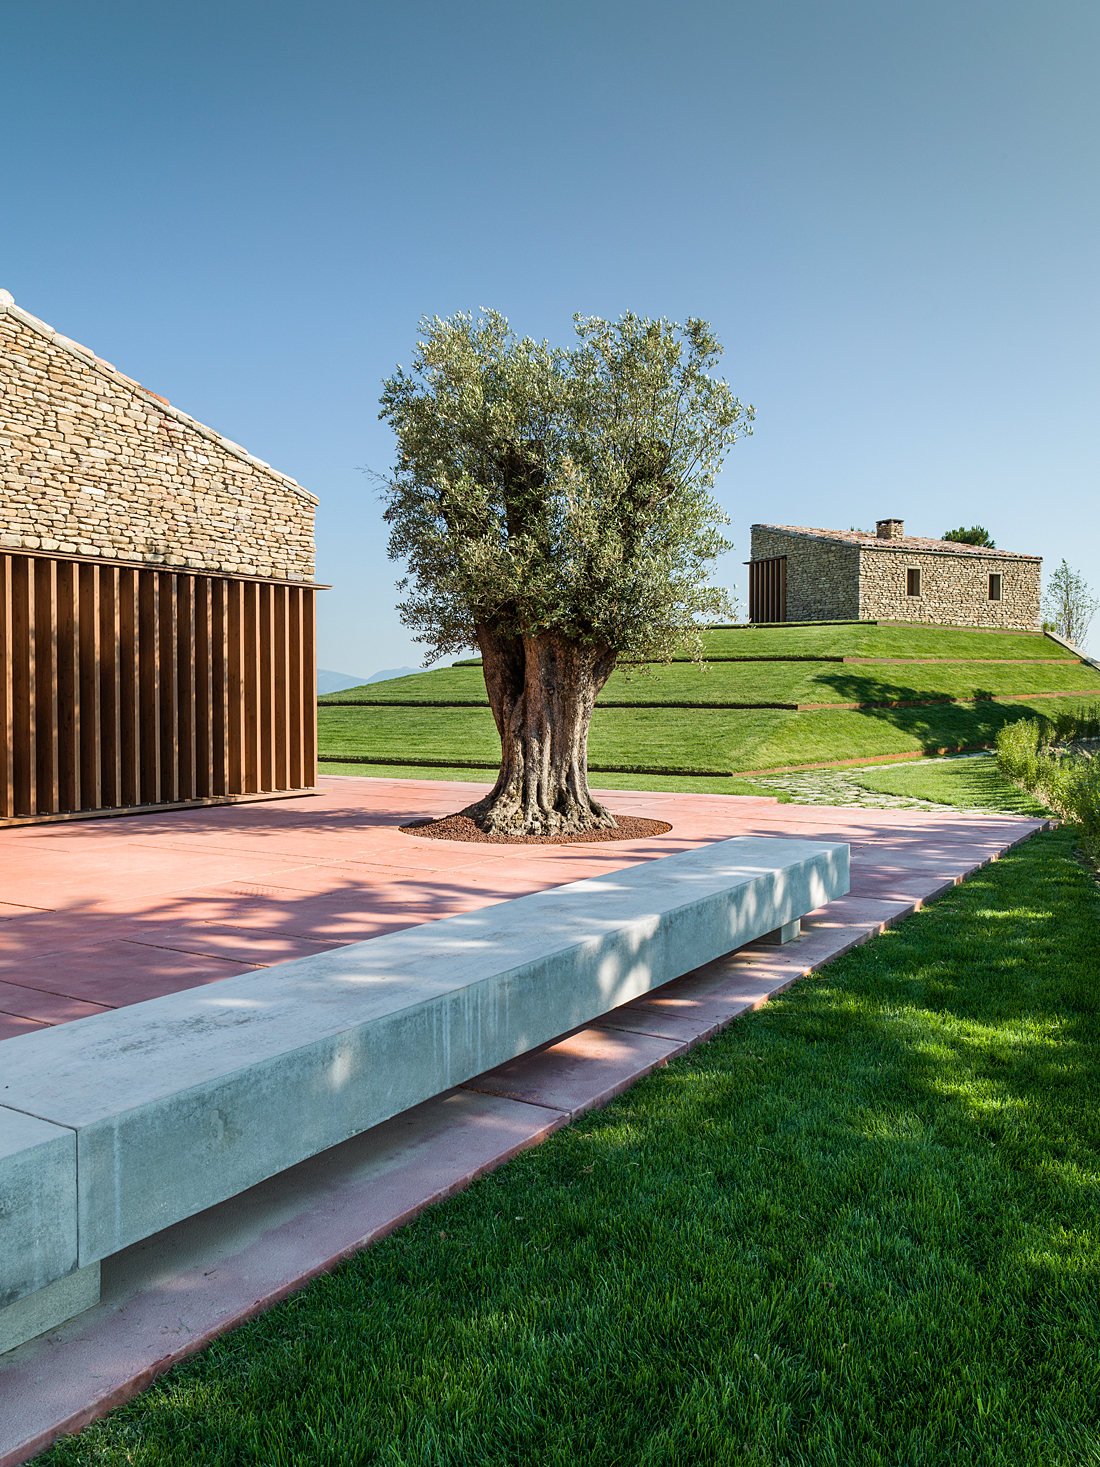 Contemporary Architecture In the Italian Countryside by GGA Architetti | DPAGES